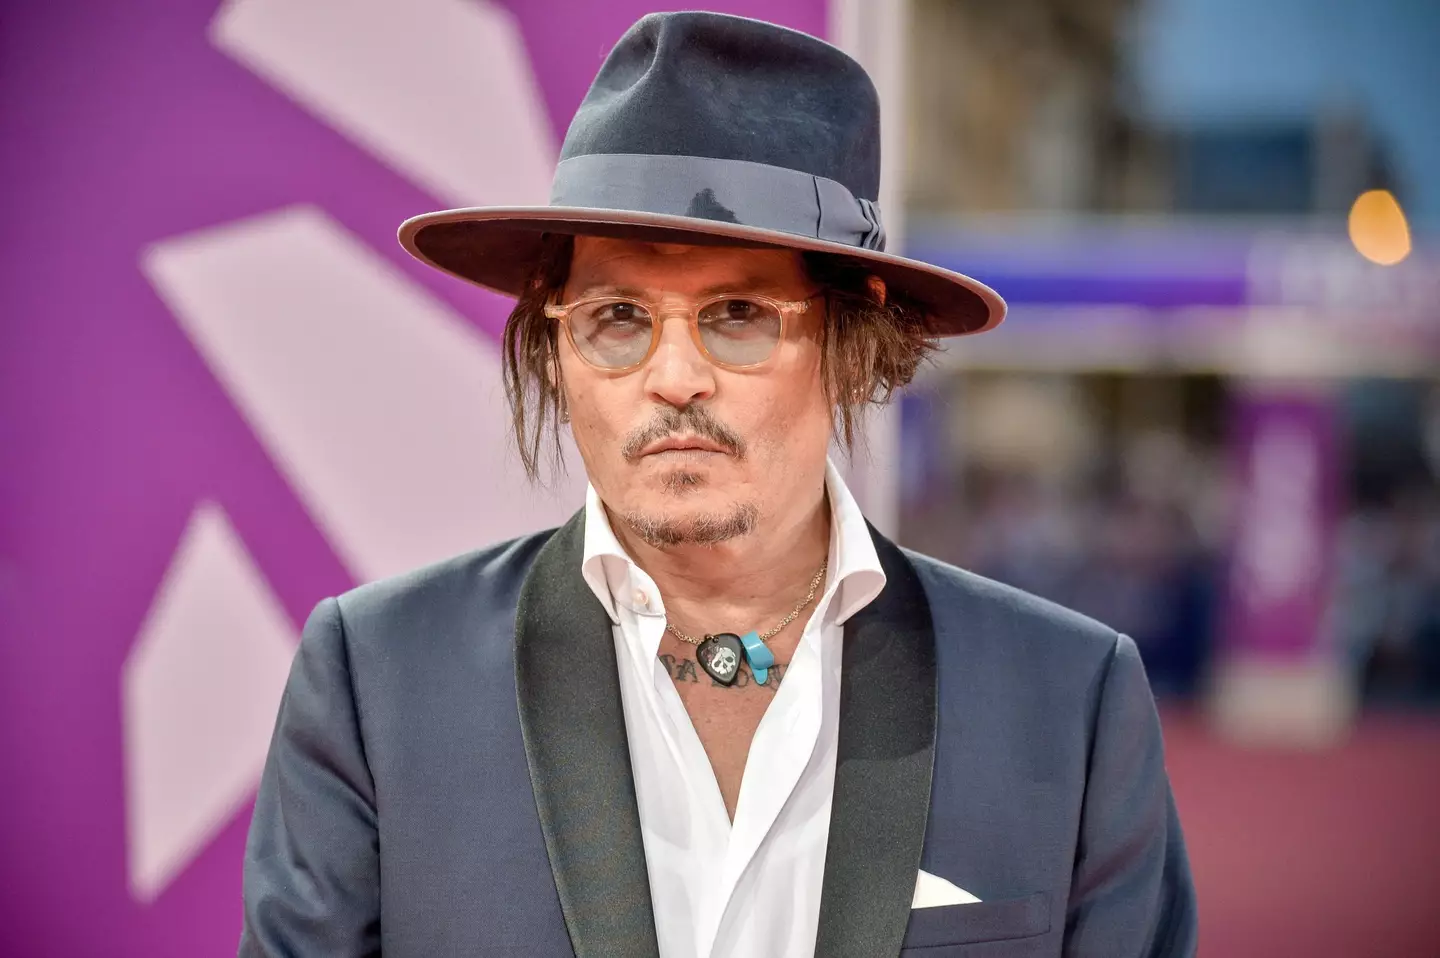 Johnny Depp at the premier of City of Lies.